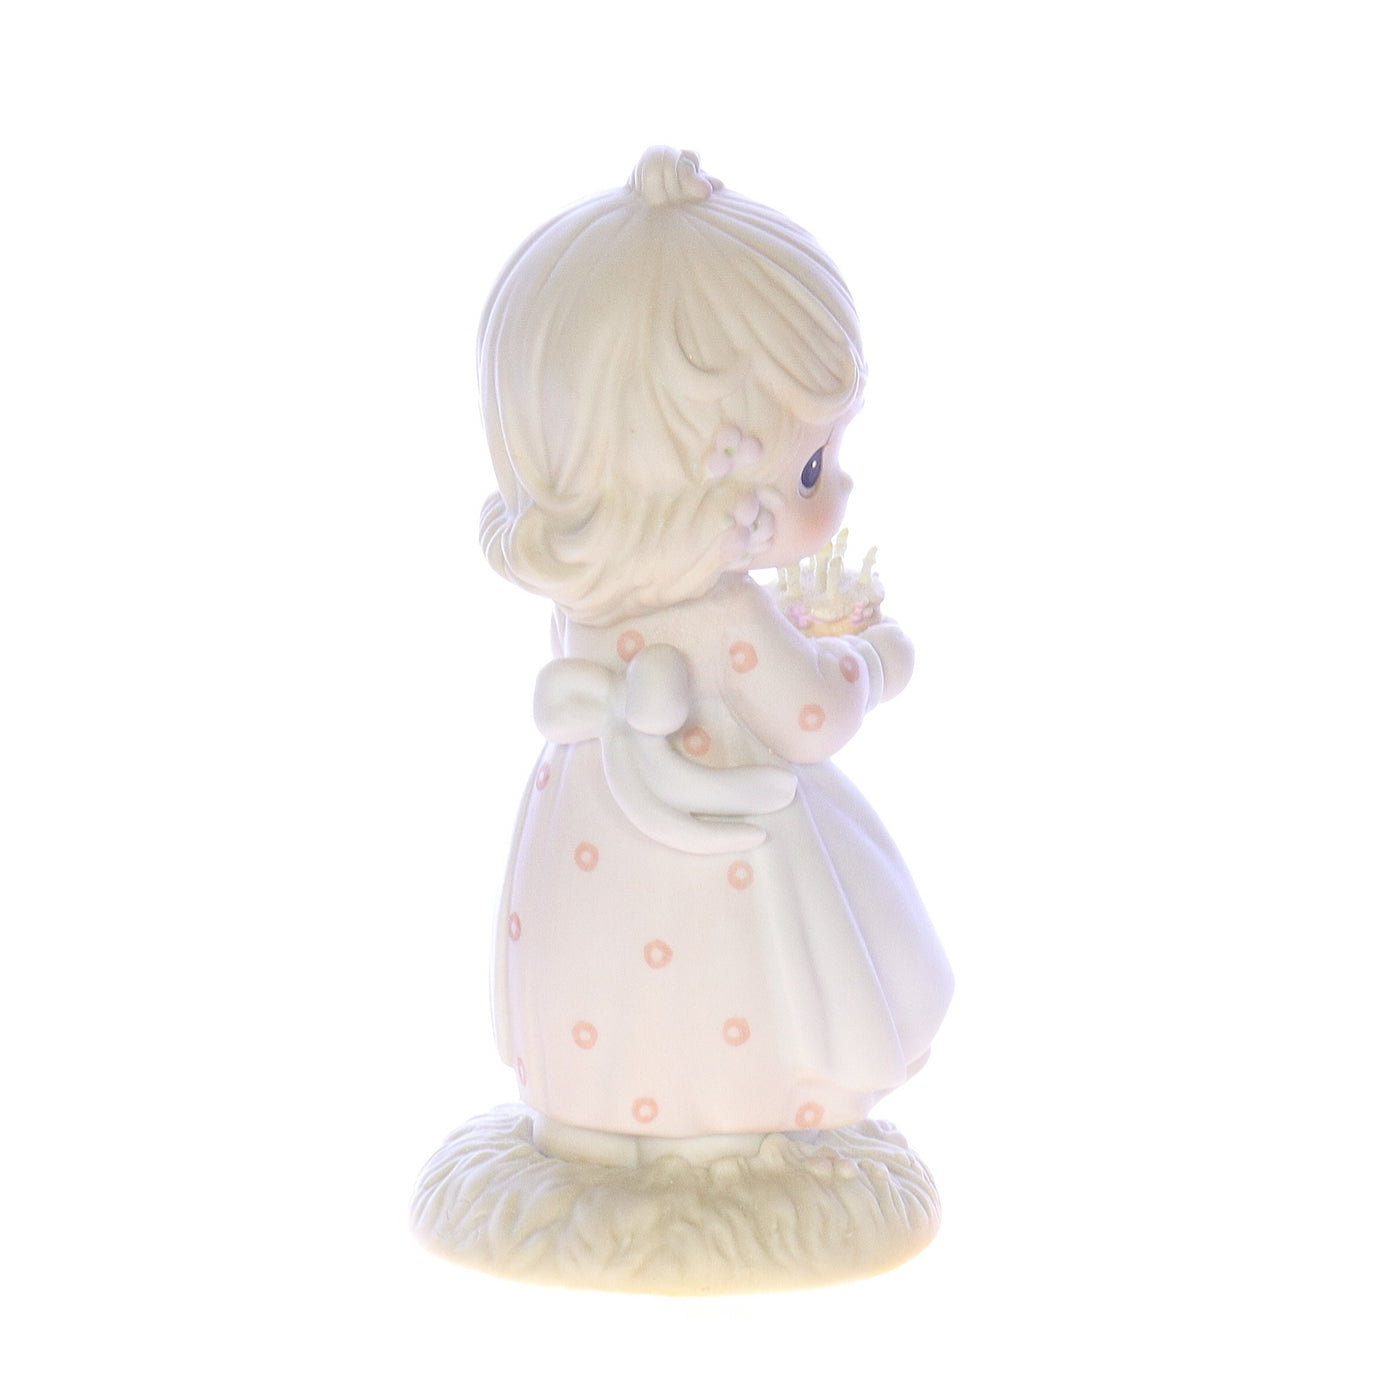 Precious_Moments_524301_May_Your_Birthday_Be_A_Blessing_Birthday_Figurine_1990_Box Right View